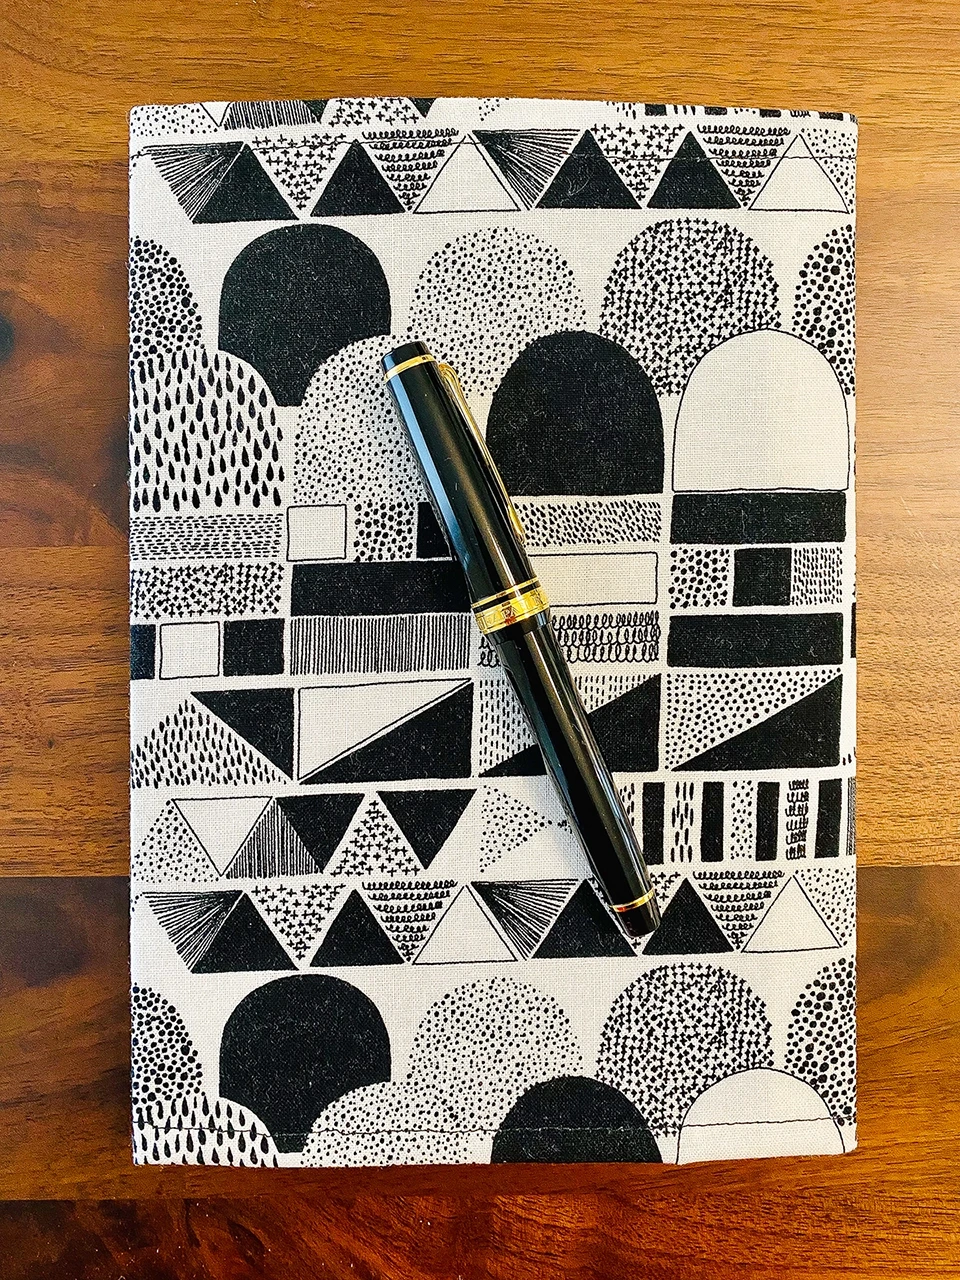 An A5 journal clad in a single panel of fabric in abstract black and white doodled shapes. A black and gold Sailor fountain pen sits beside the journal